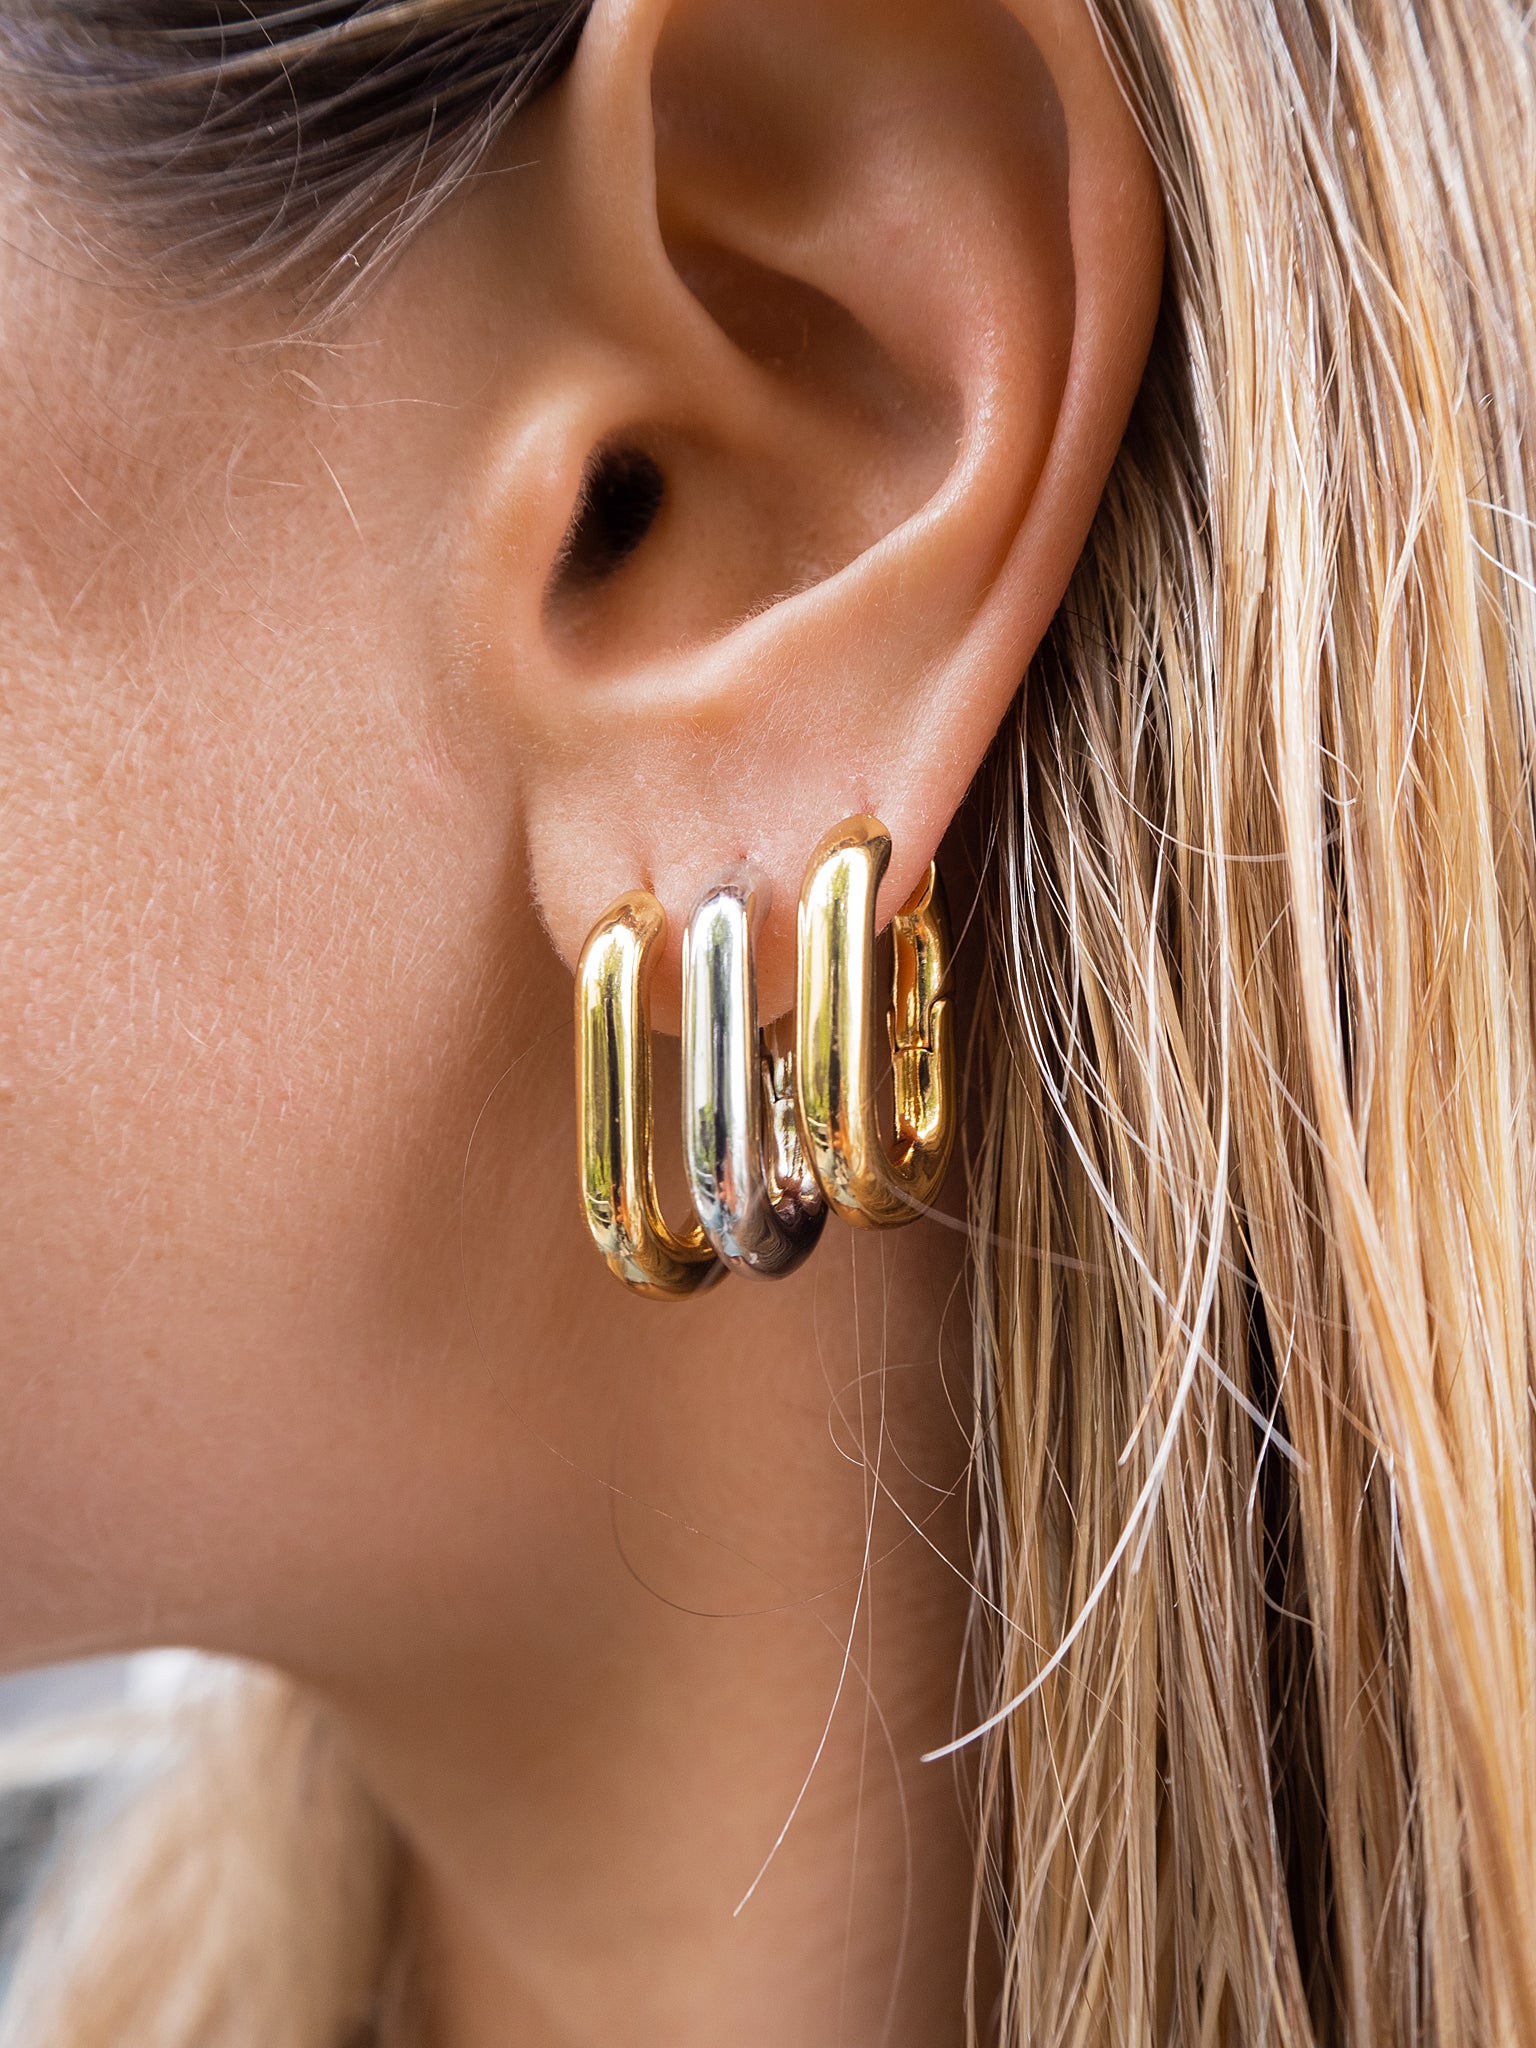 Luv Aj XL Chain Link Hoop Earrings in Polished Gold Plated